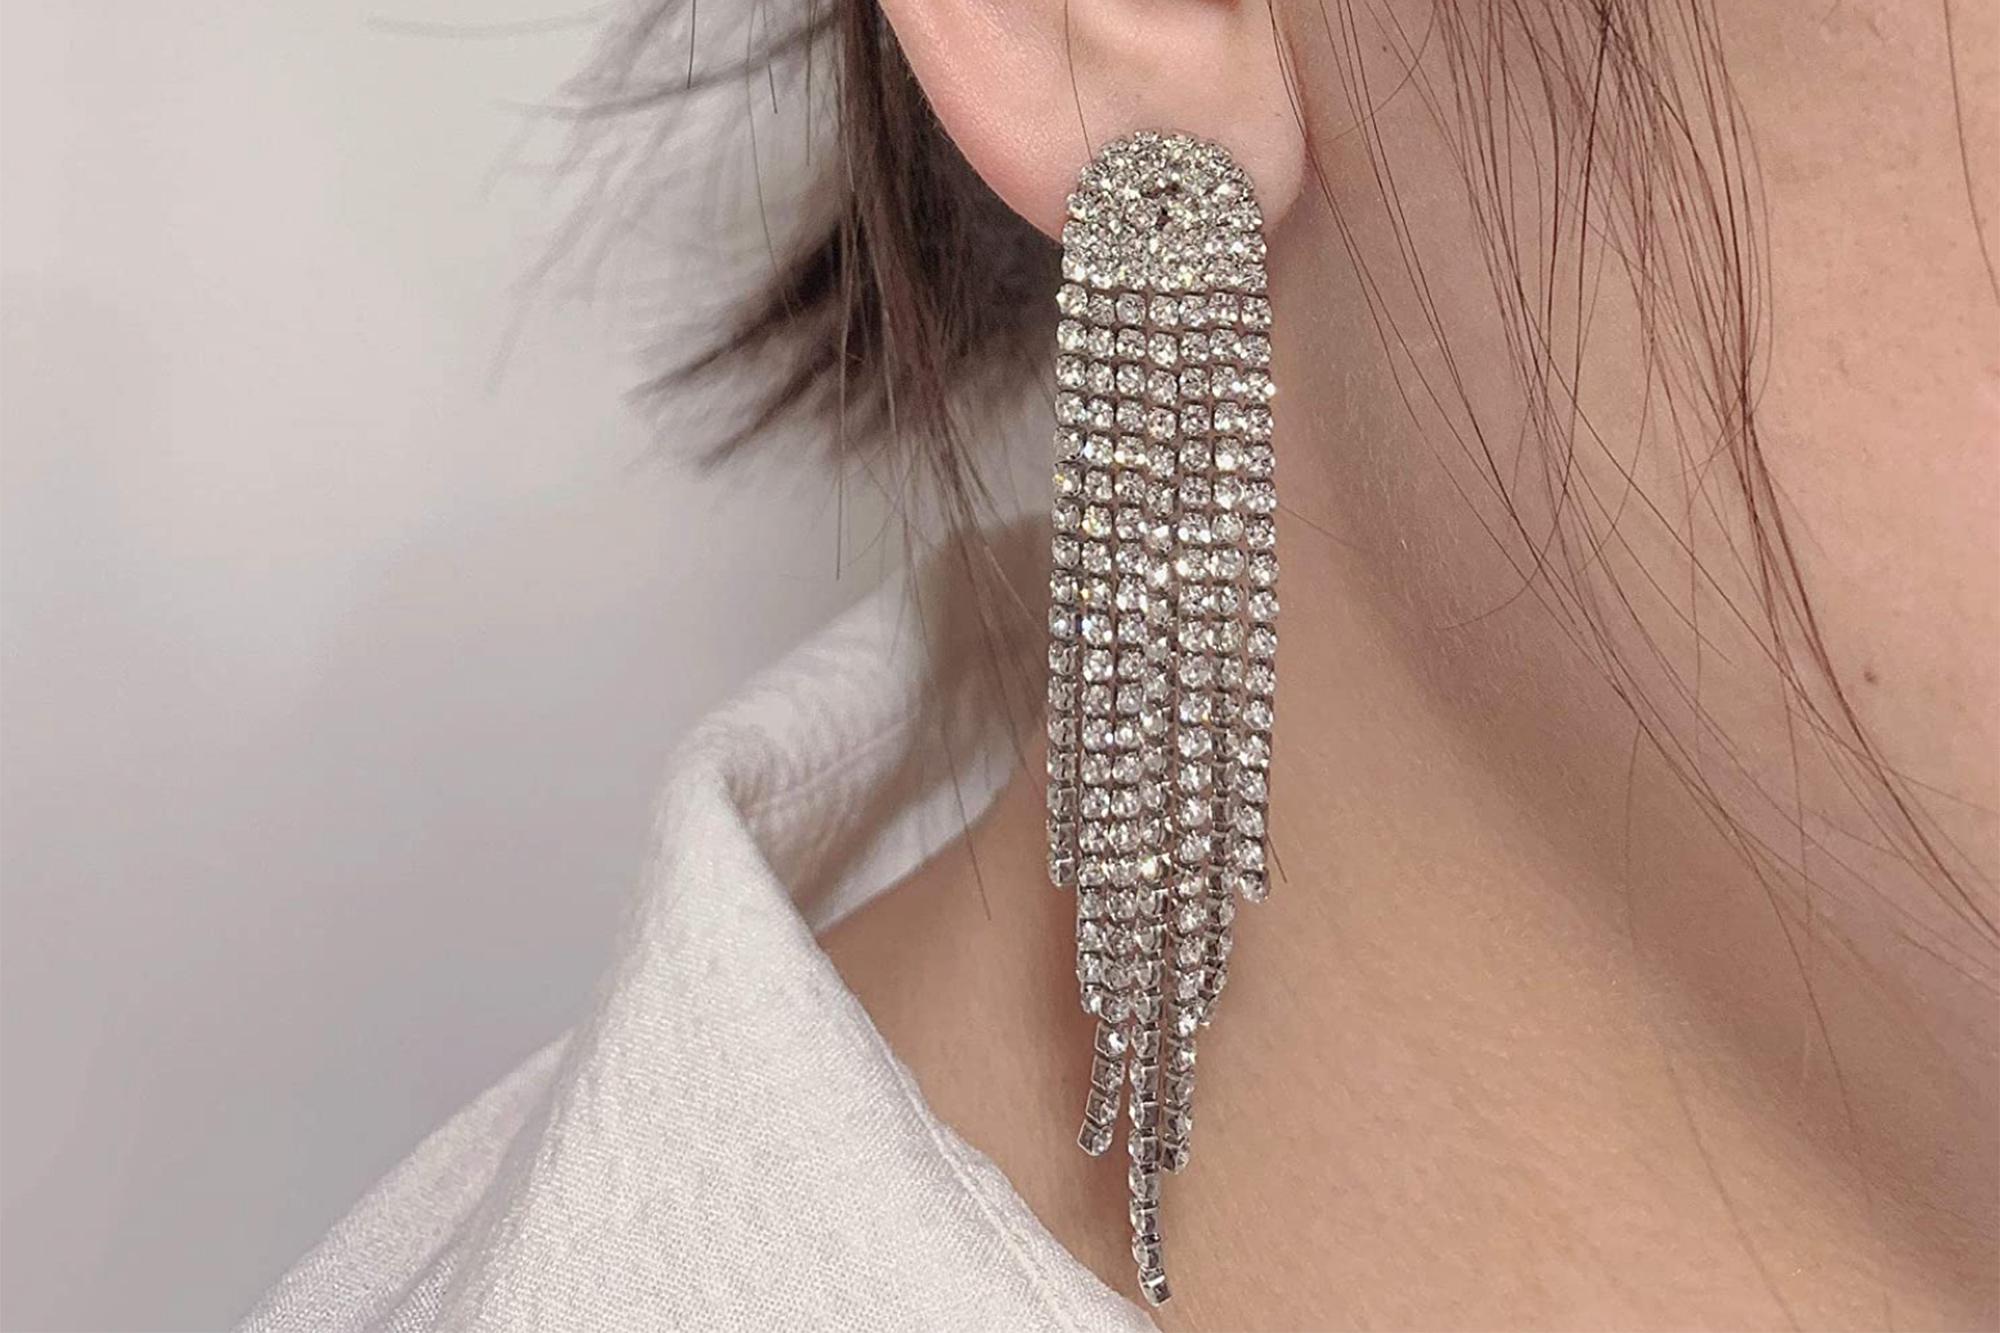 Details more than 128 earrings 2023 trends best